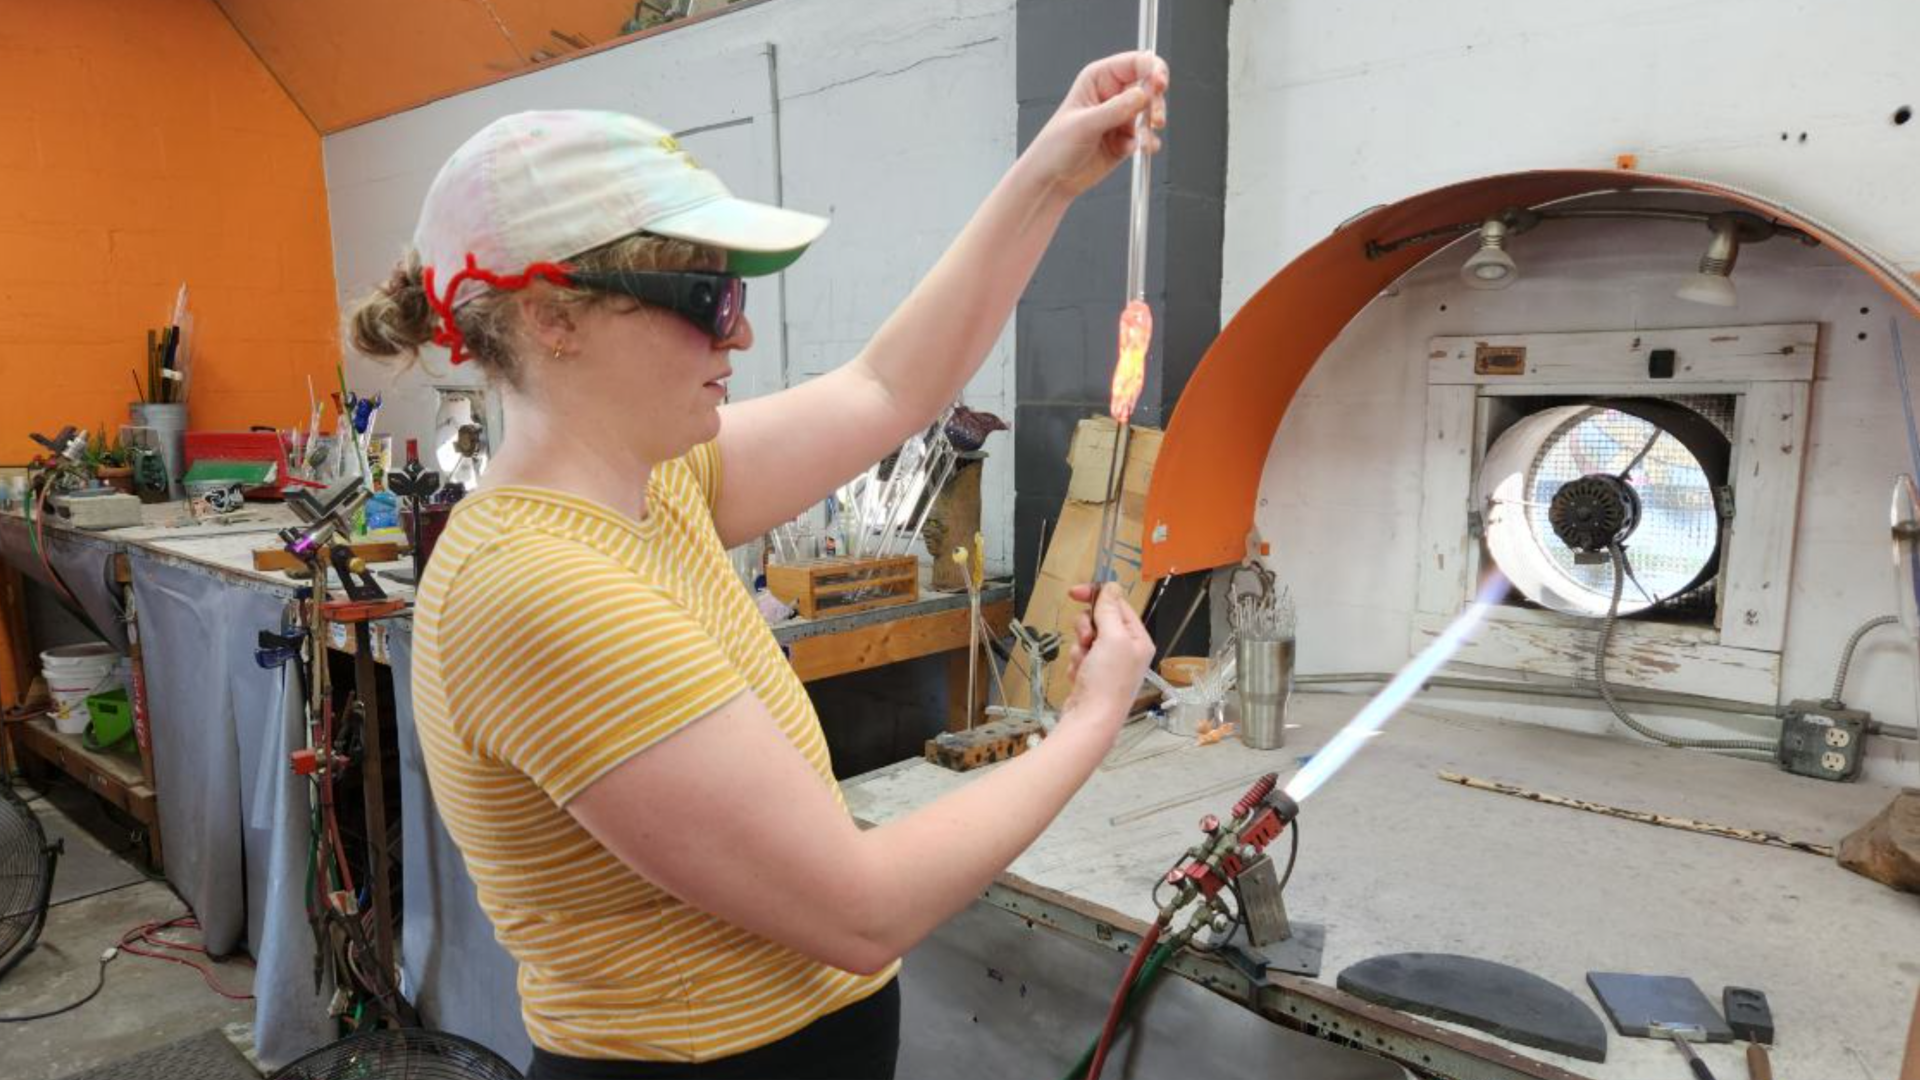 A woman in a yellow top handling molten glass with a pair of tweezers.